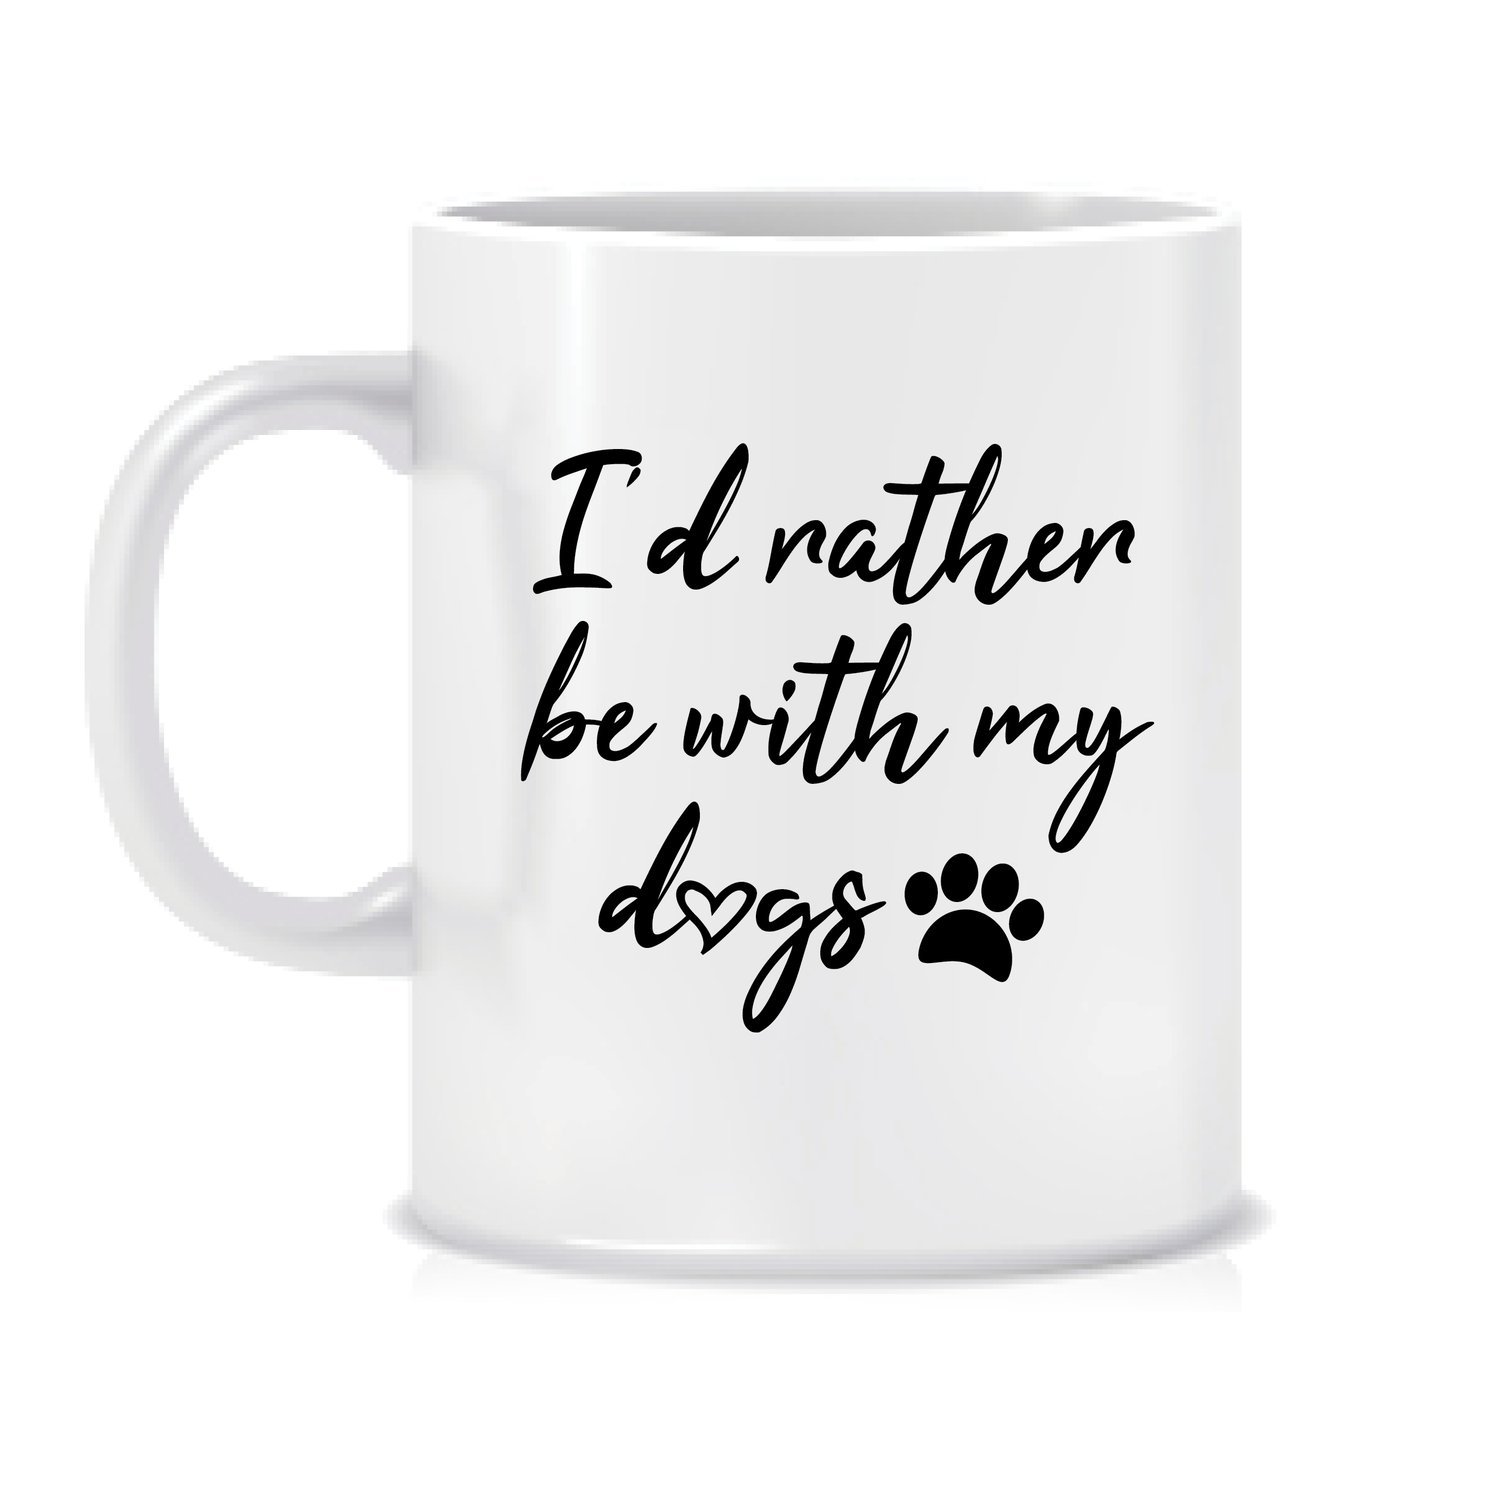 Image of I'd rather be with my dog mug